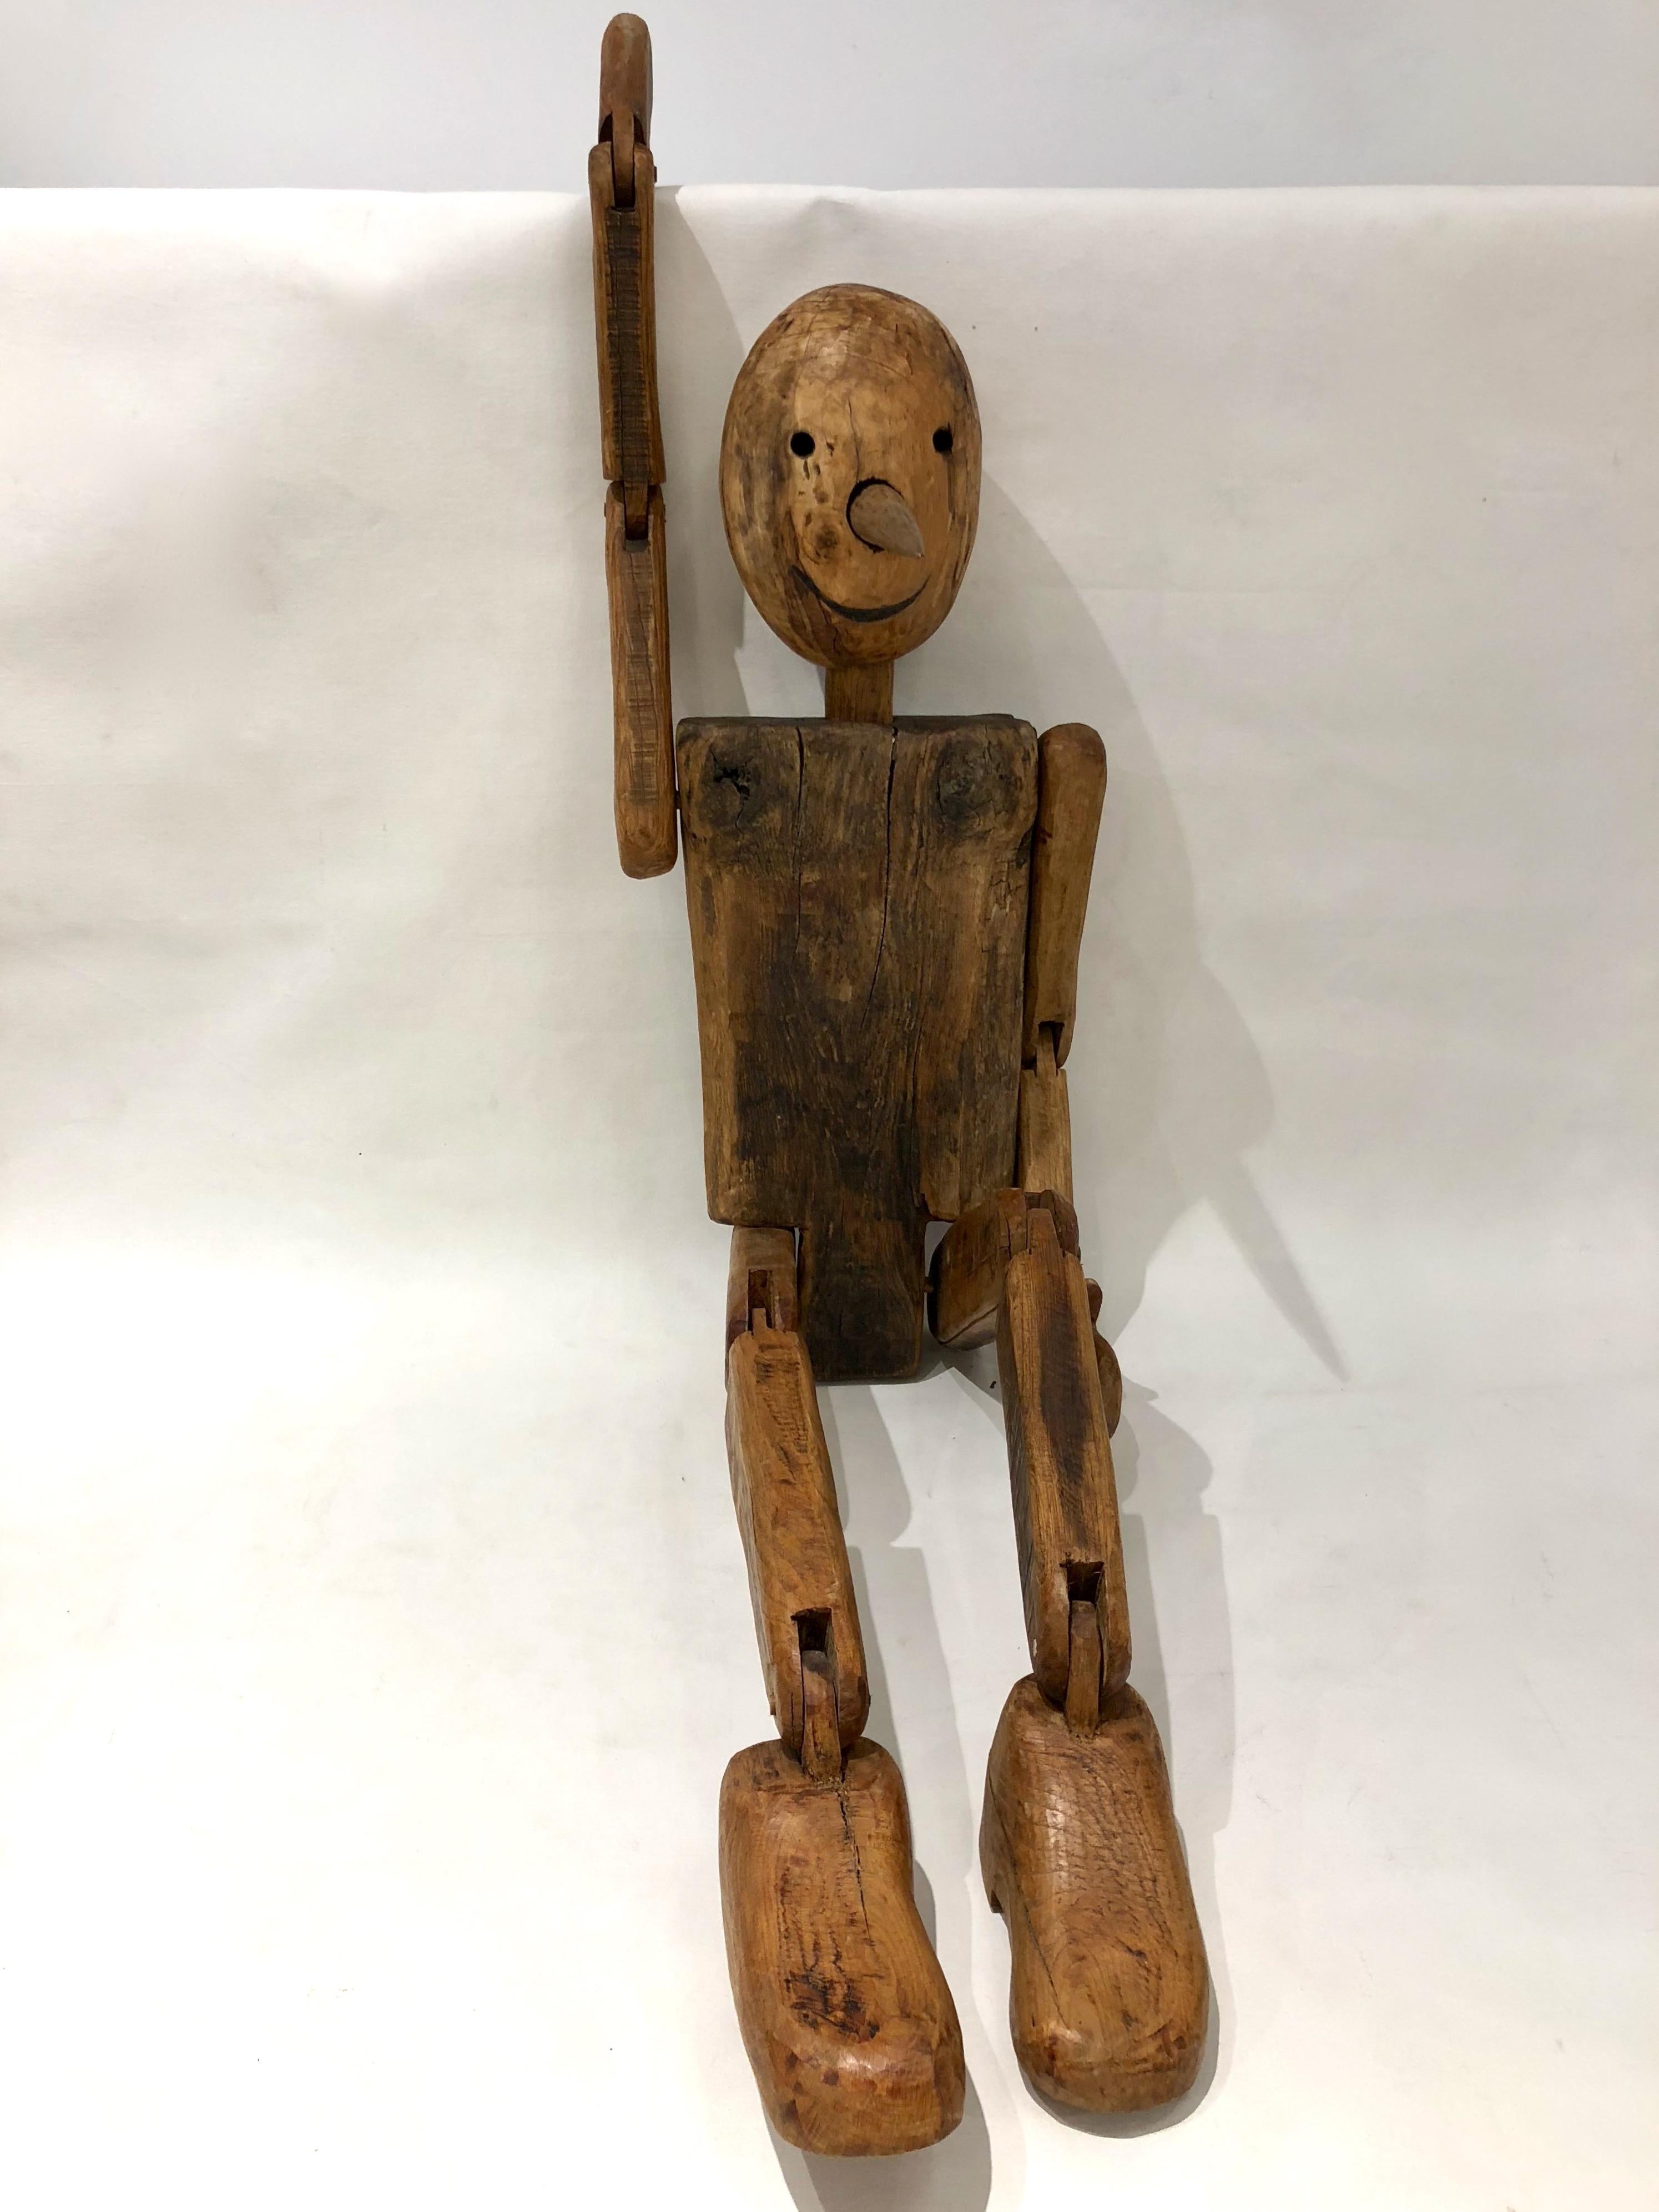 Modern 1960s Italian Vintage Life Size Articulated Wooden Pinocchio Sculpture 3